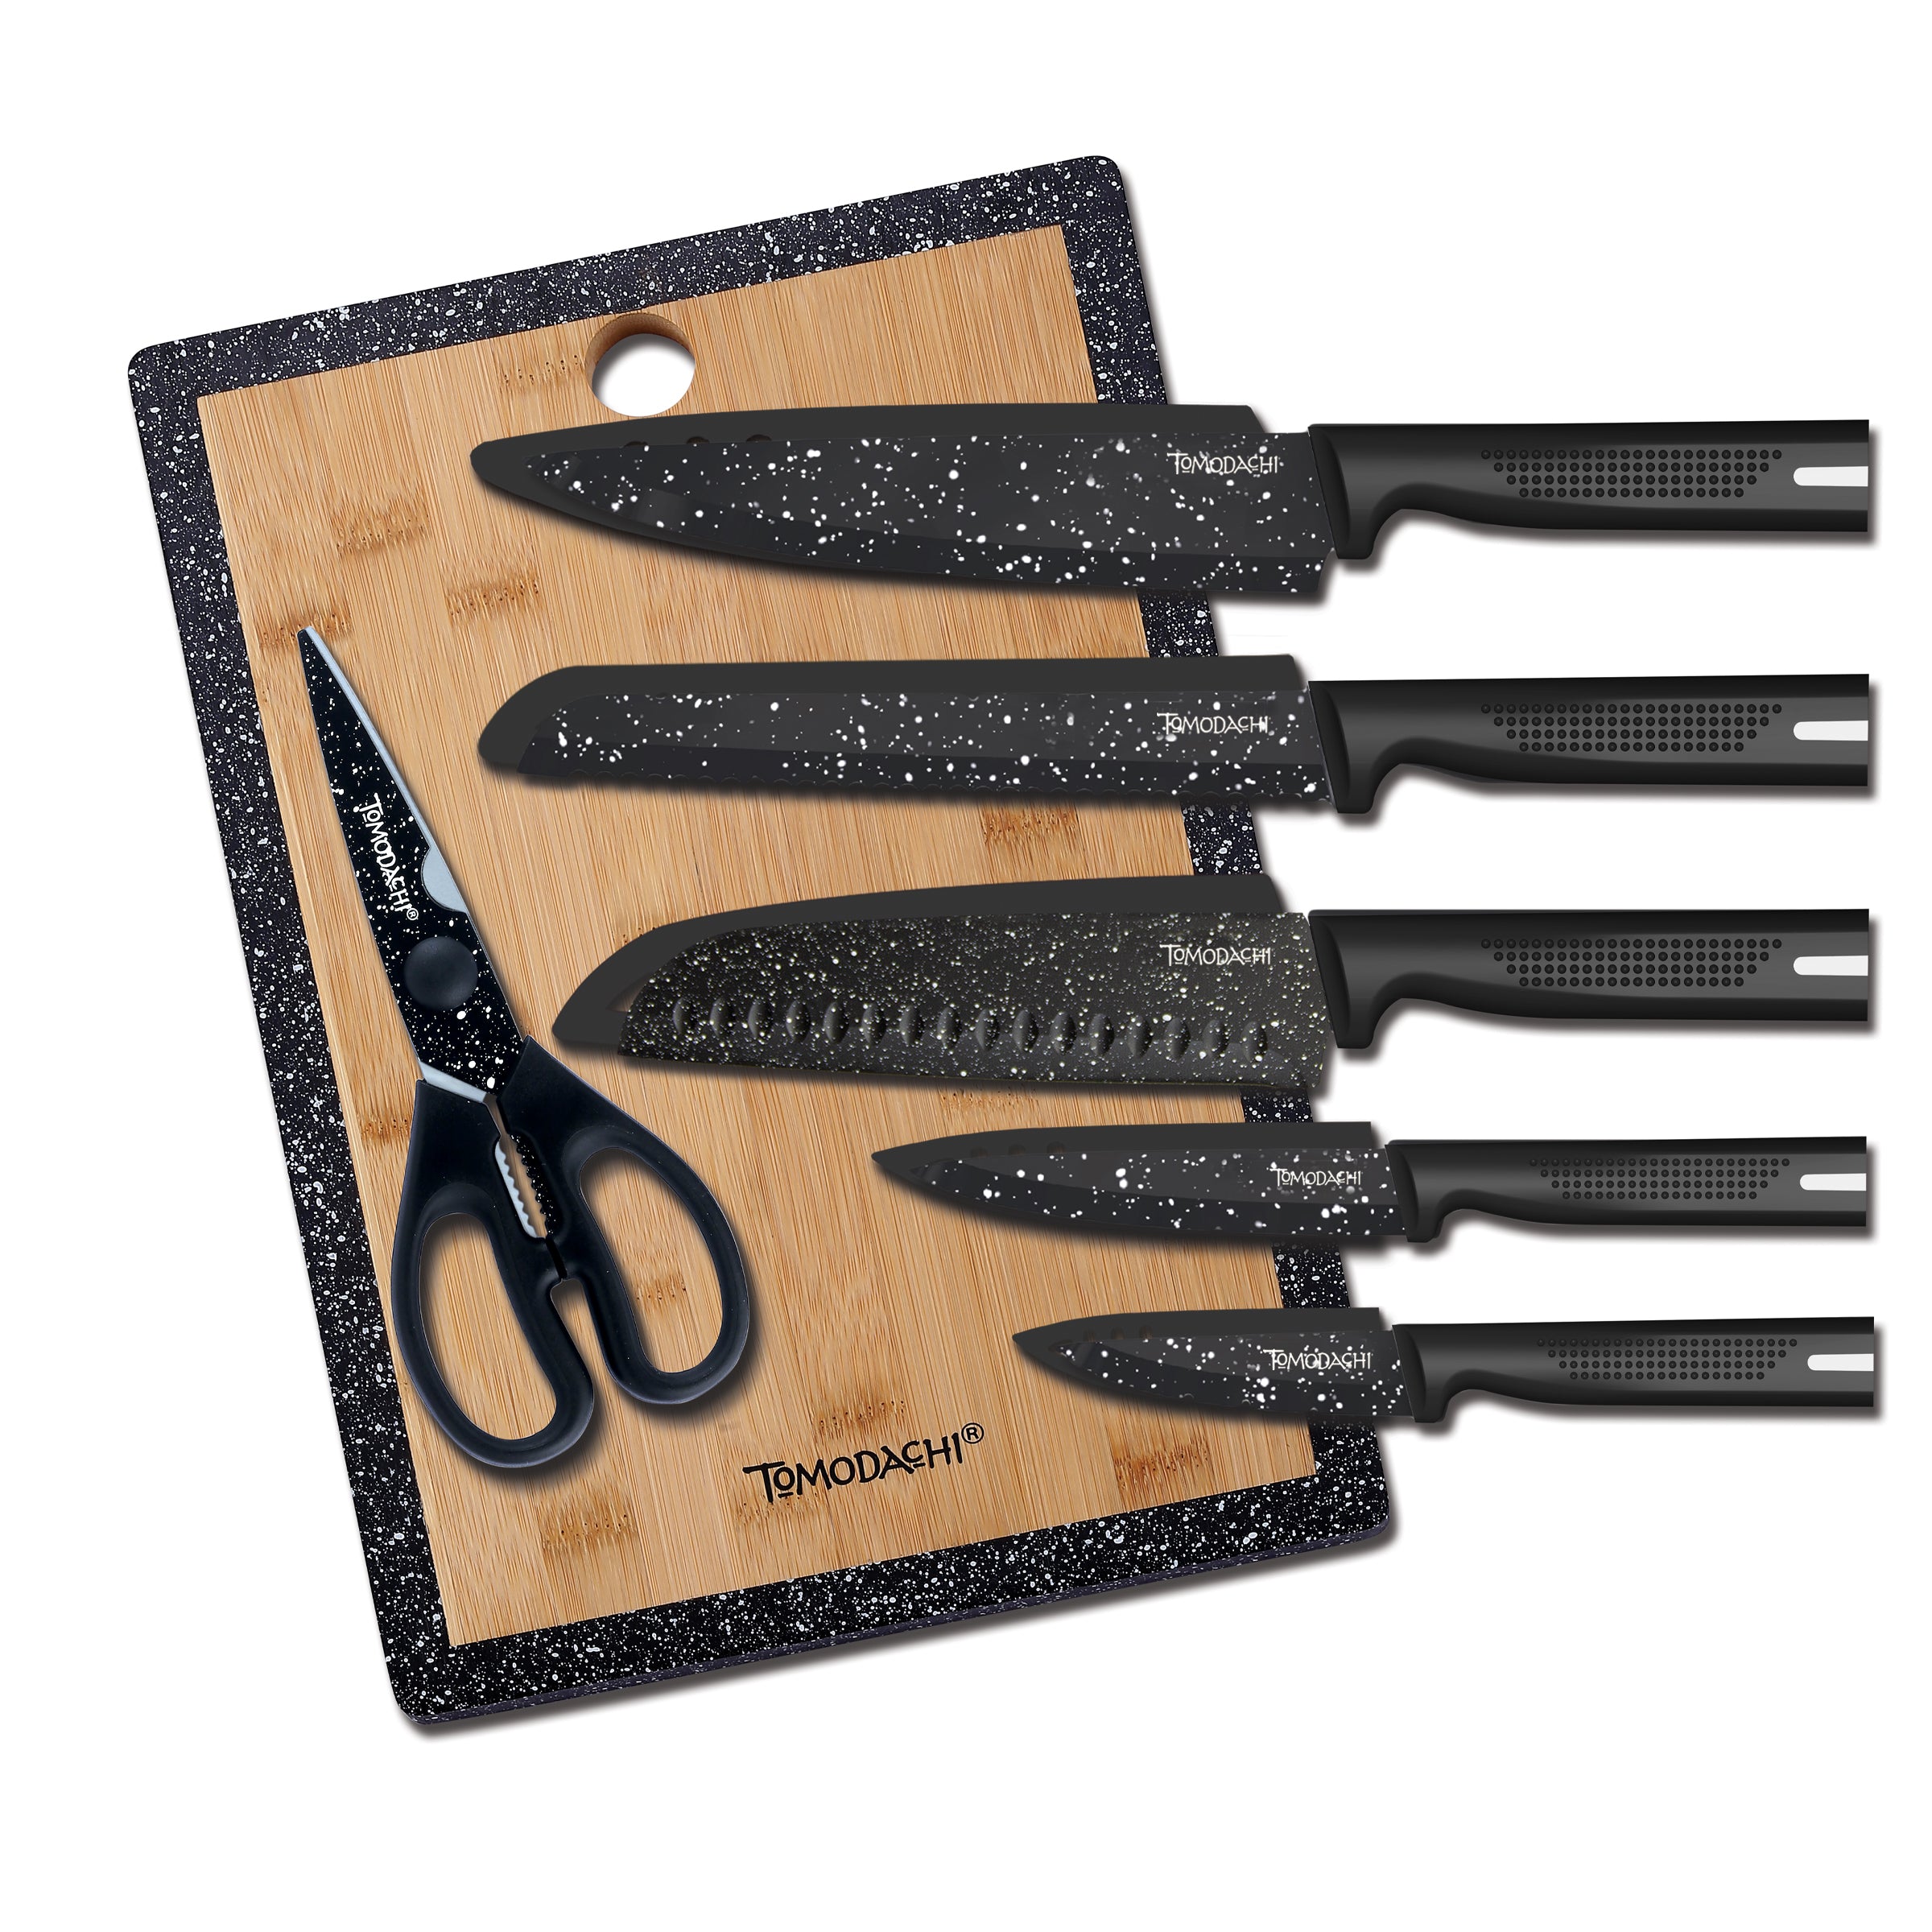 New Tomodachi Hampton Forge Knife Set, Christmas in August! 300 Lots of  Brand New Merchandise, Patio Furniture, Home Decor, Gifts, Etc